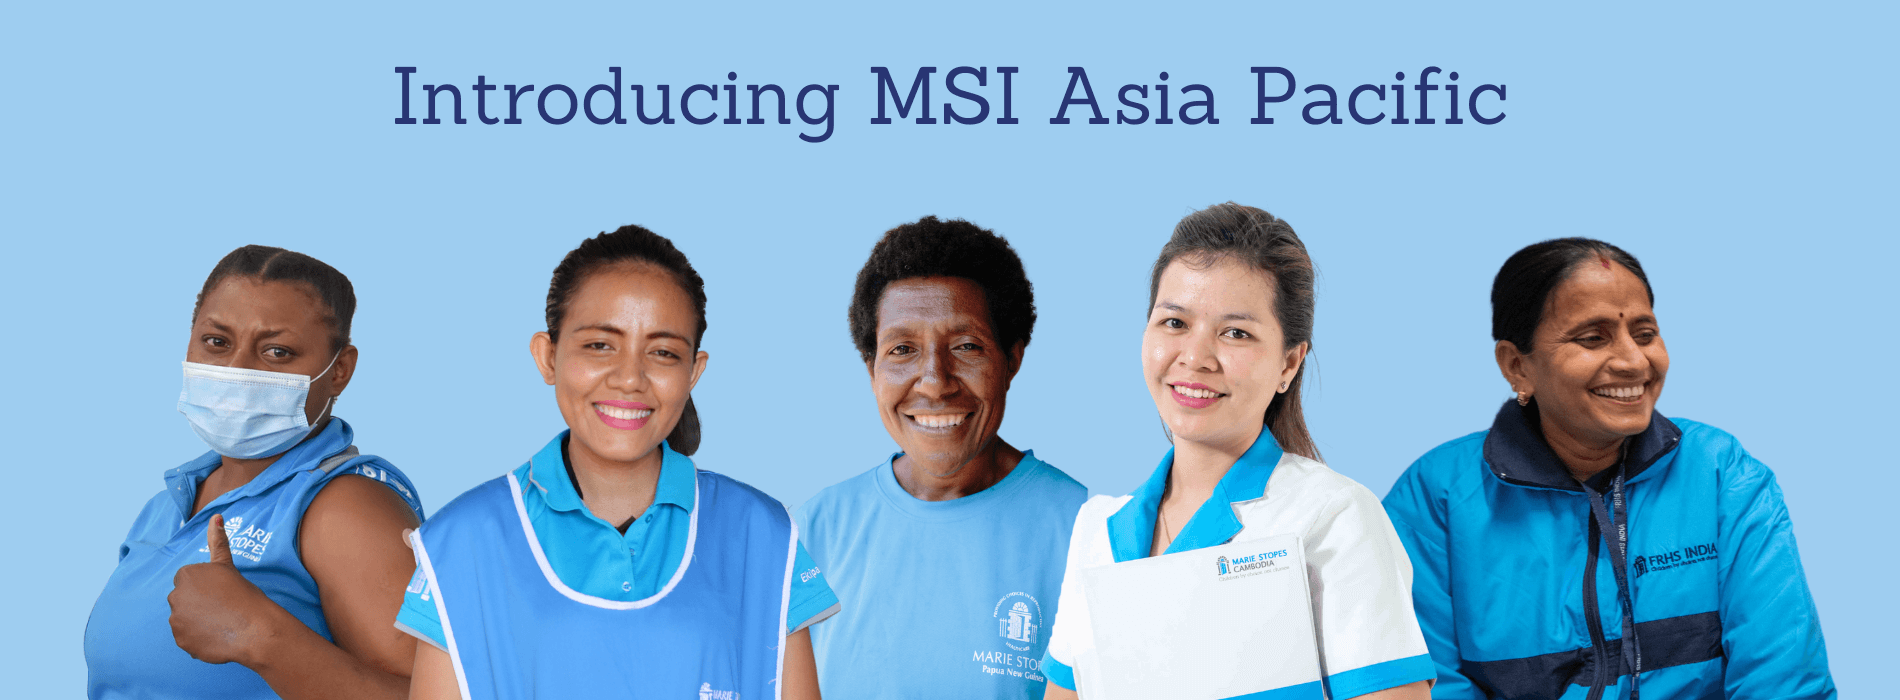 Introducing MSI Asia Pacific banner with pictures of women who work for the service from the Asia Pacific